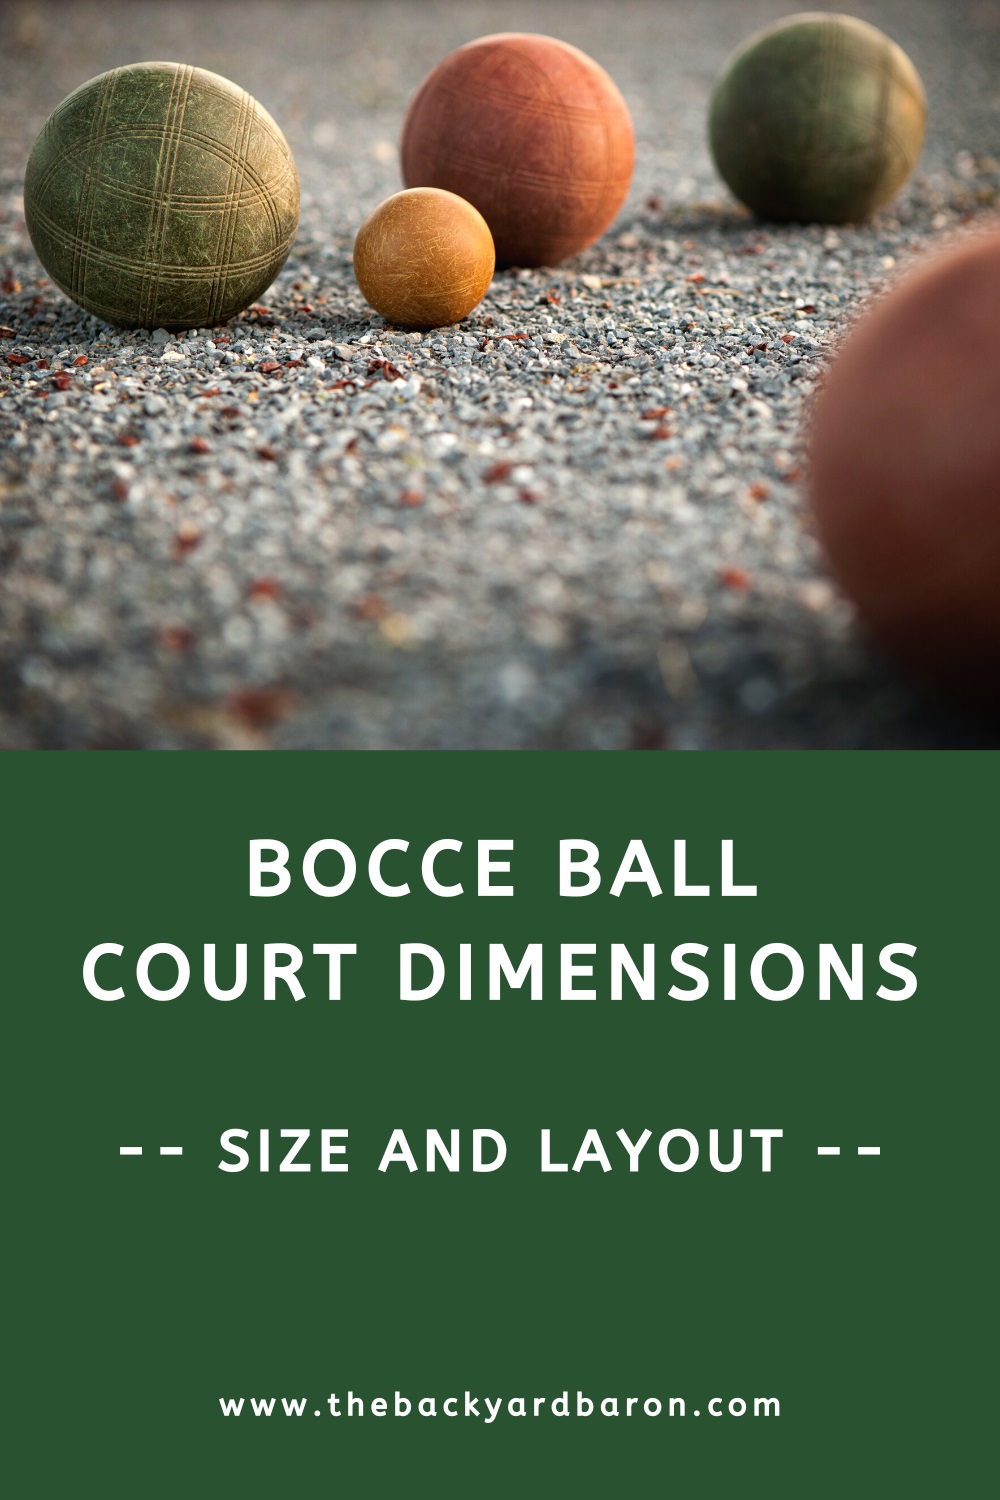 Bocce court dimensions guide